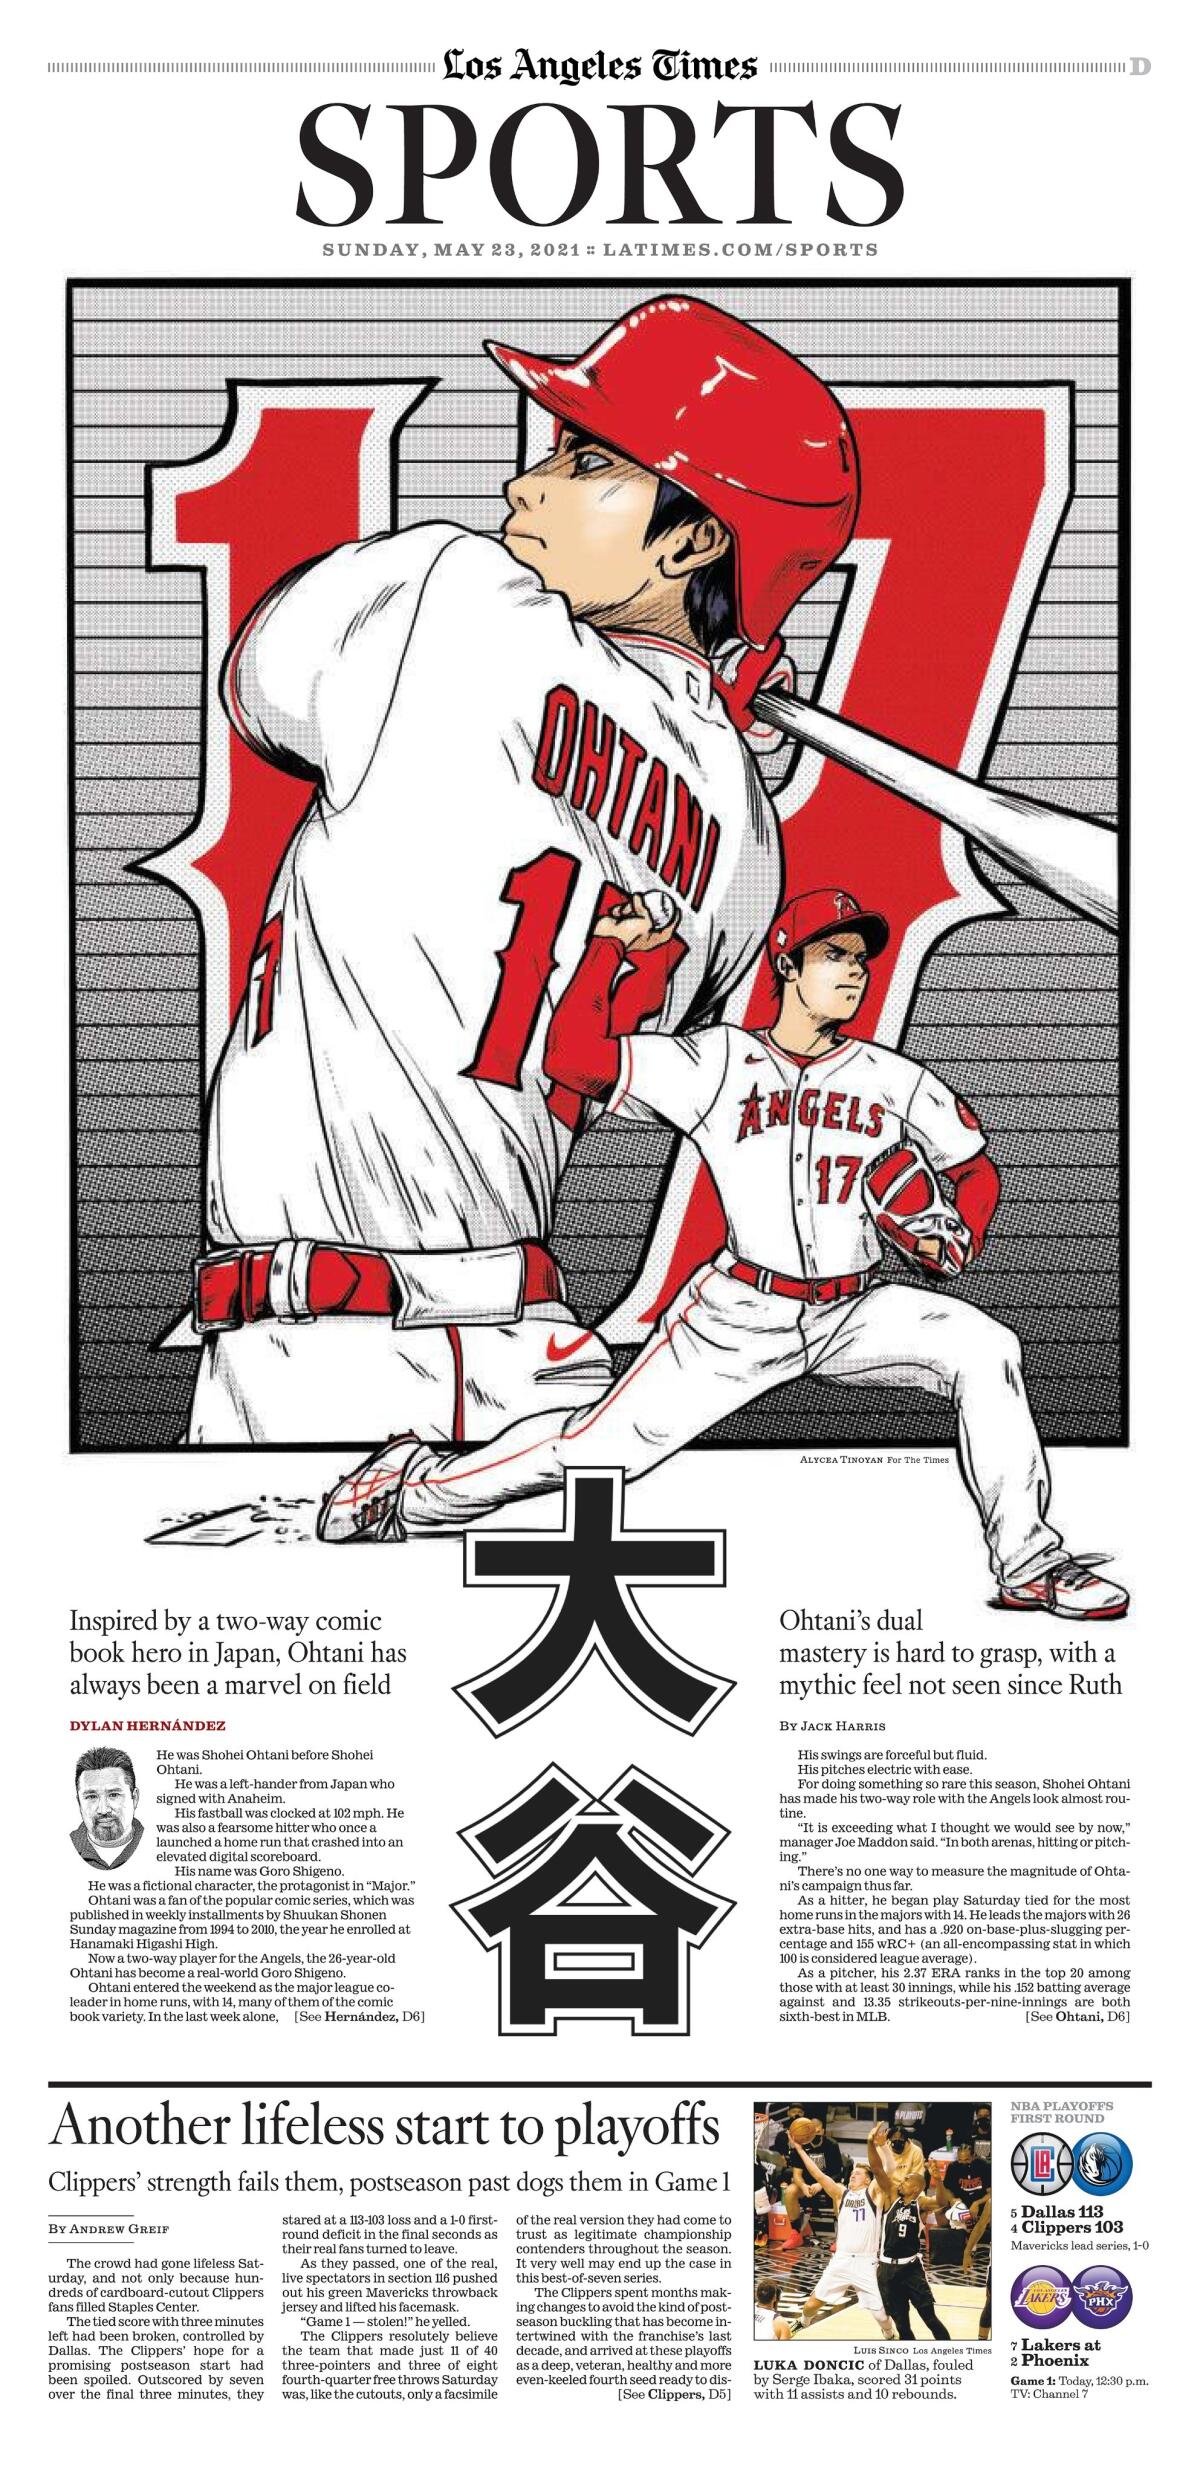 A copy of the Los Angeles Times sports cover featuring an anime-inspired drawing of Shohei Ohtani